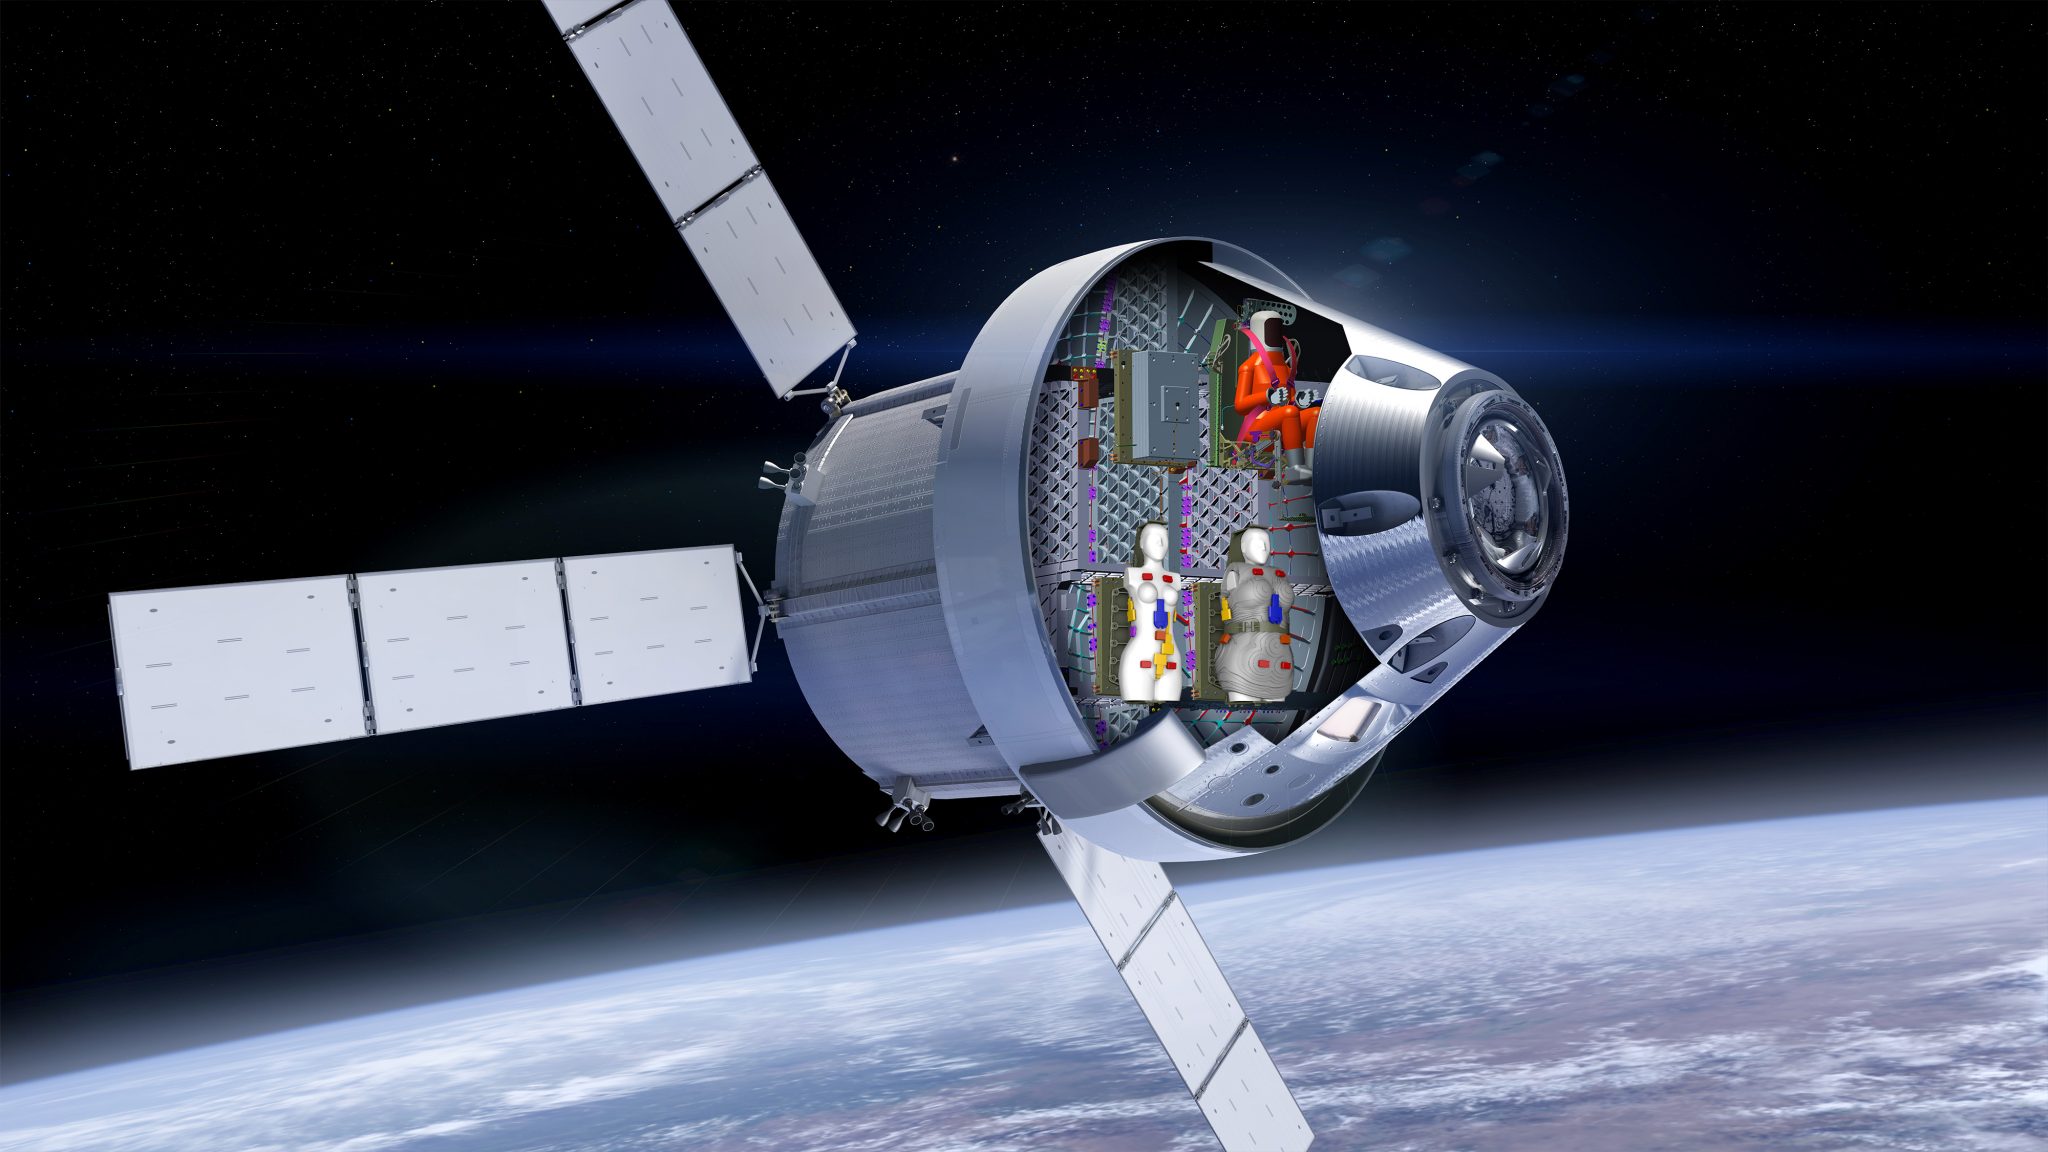 Artemis 1 will help NASA protect astronauts from deep space radiation